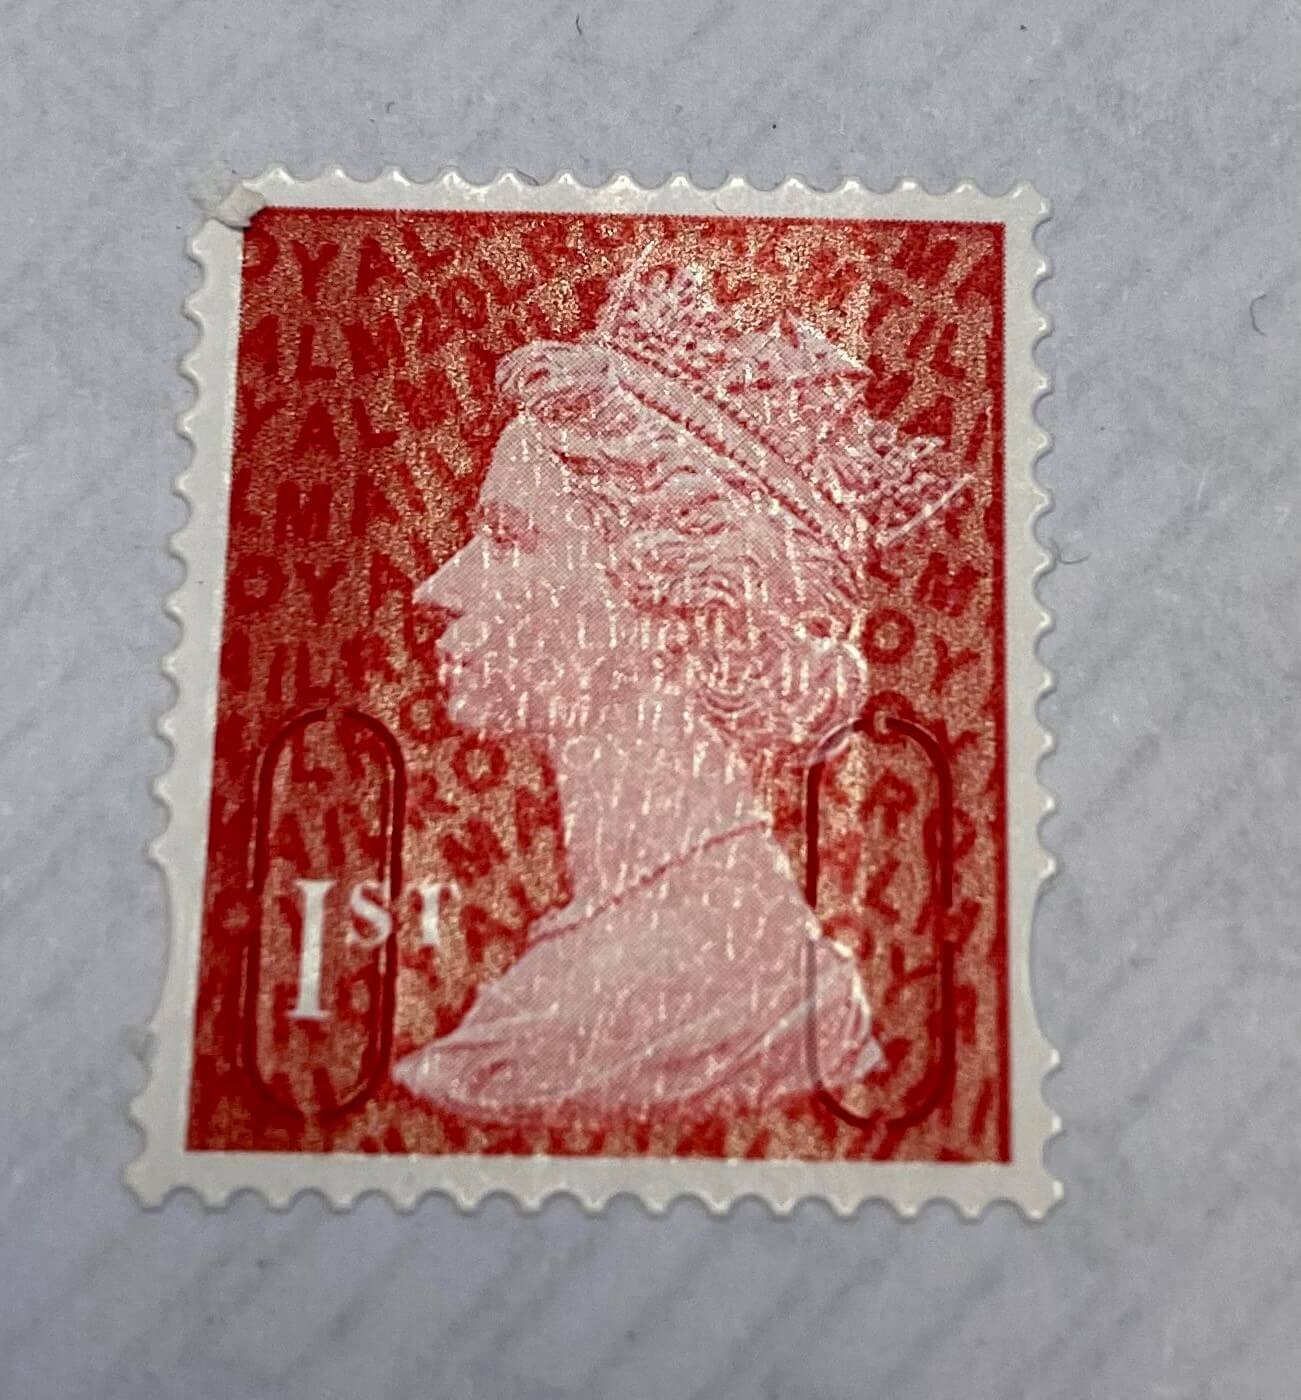 Are 2nd class stamps better value than 1st class stamps?